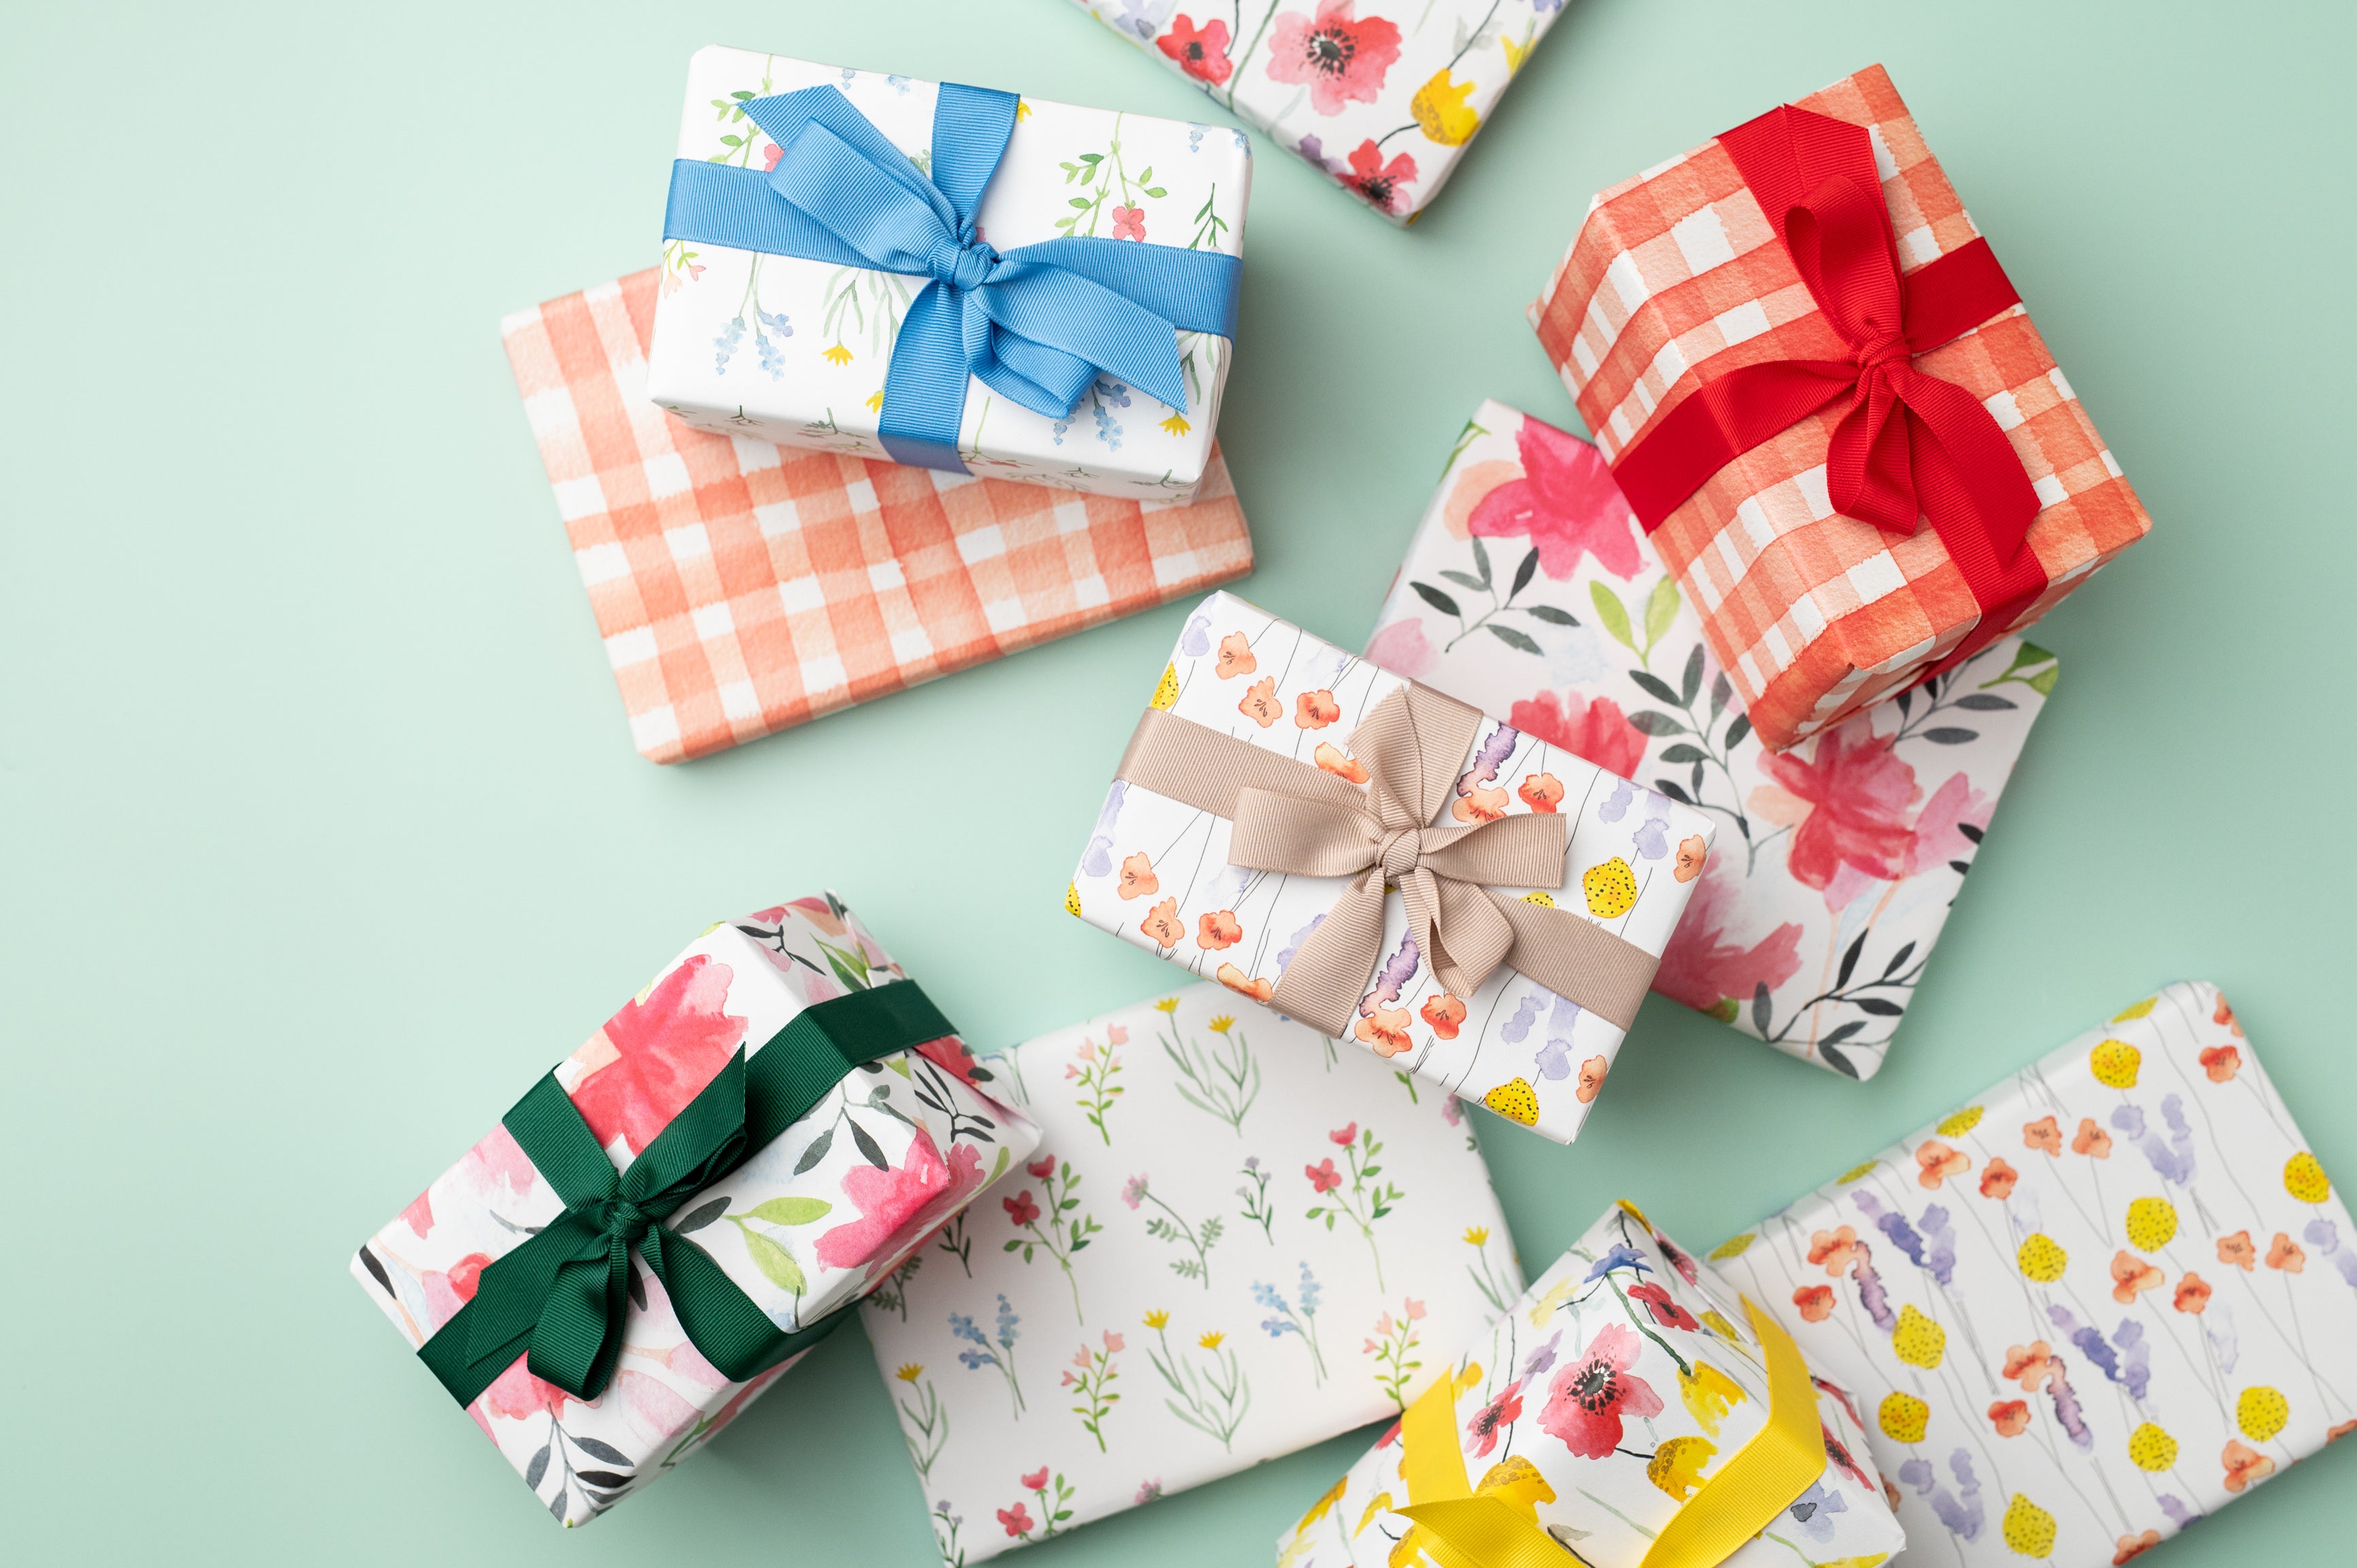 An image of various presents wrapped in Ruby & Bo Recycled Wrapping Paper on a mint green background